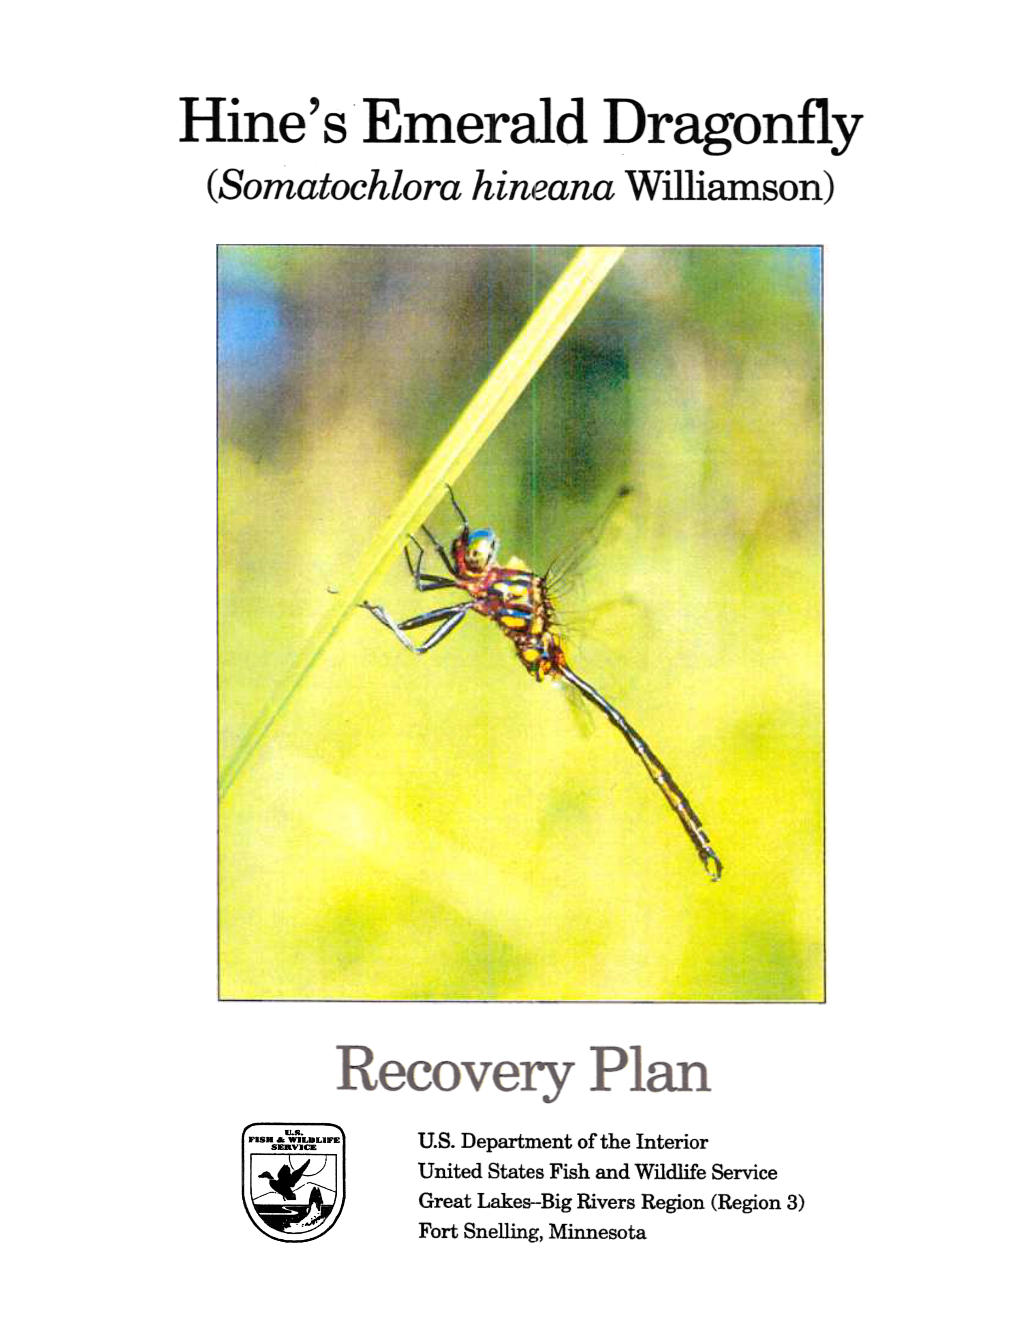 Hine's Emerald Dragonfly Recovery Plan